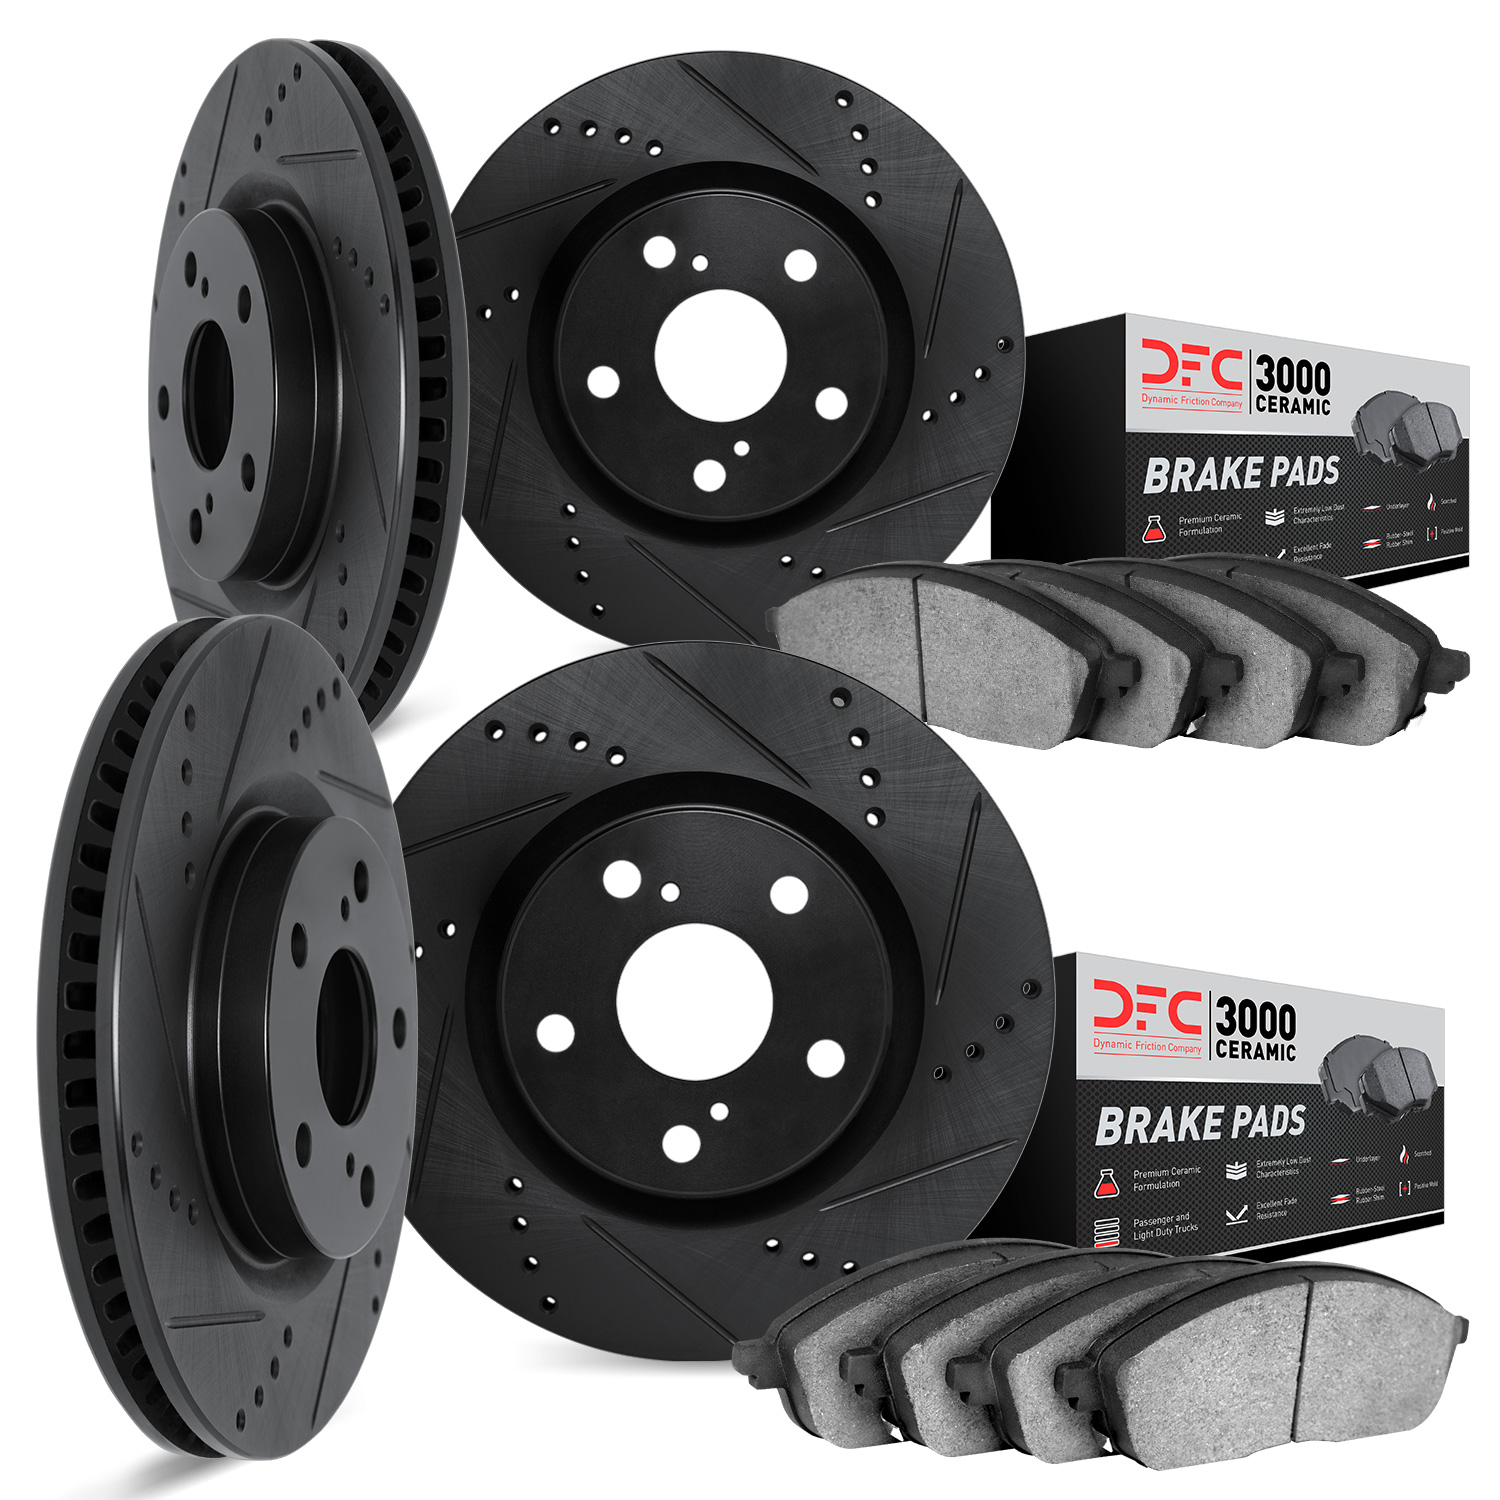 8304-31037 Drilled/Slotted Brake Rotors with 3000-Series Ceramic Brake Pads Kit [Black], 1997-2000 BMW, Position: Front and Rear